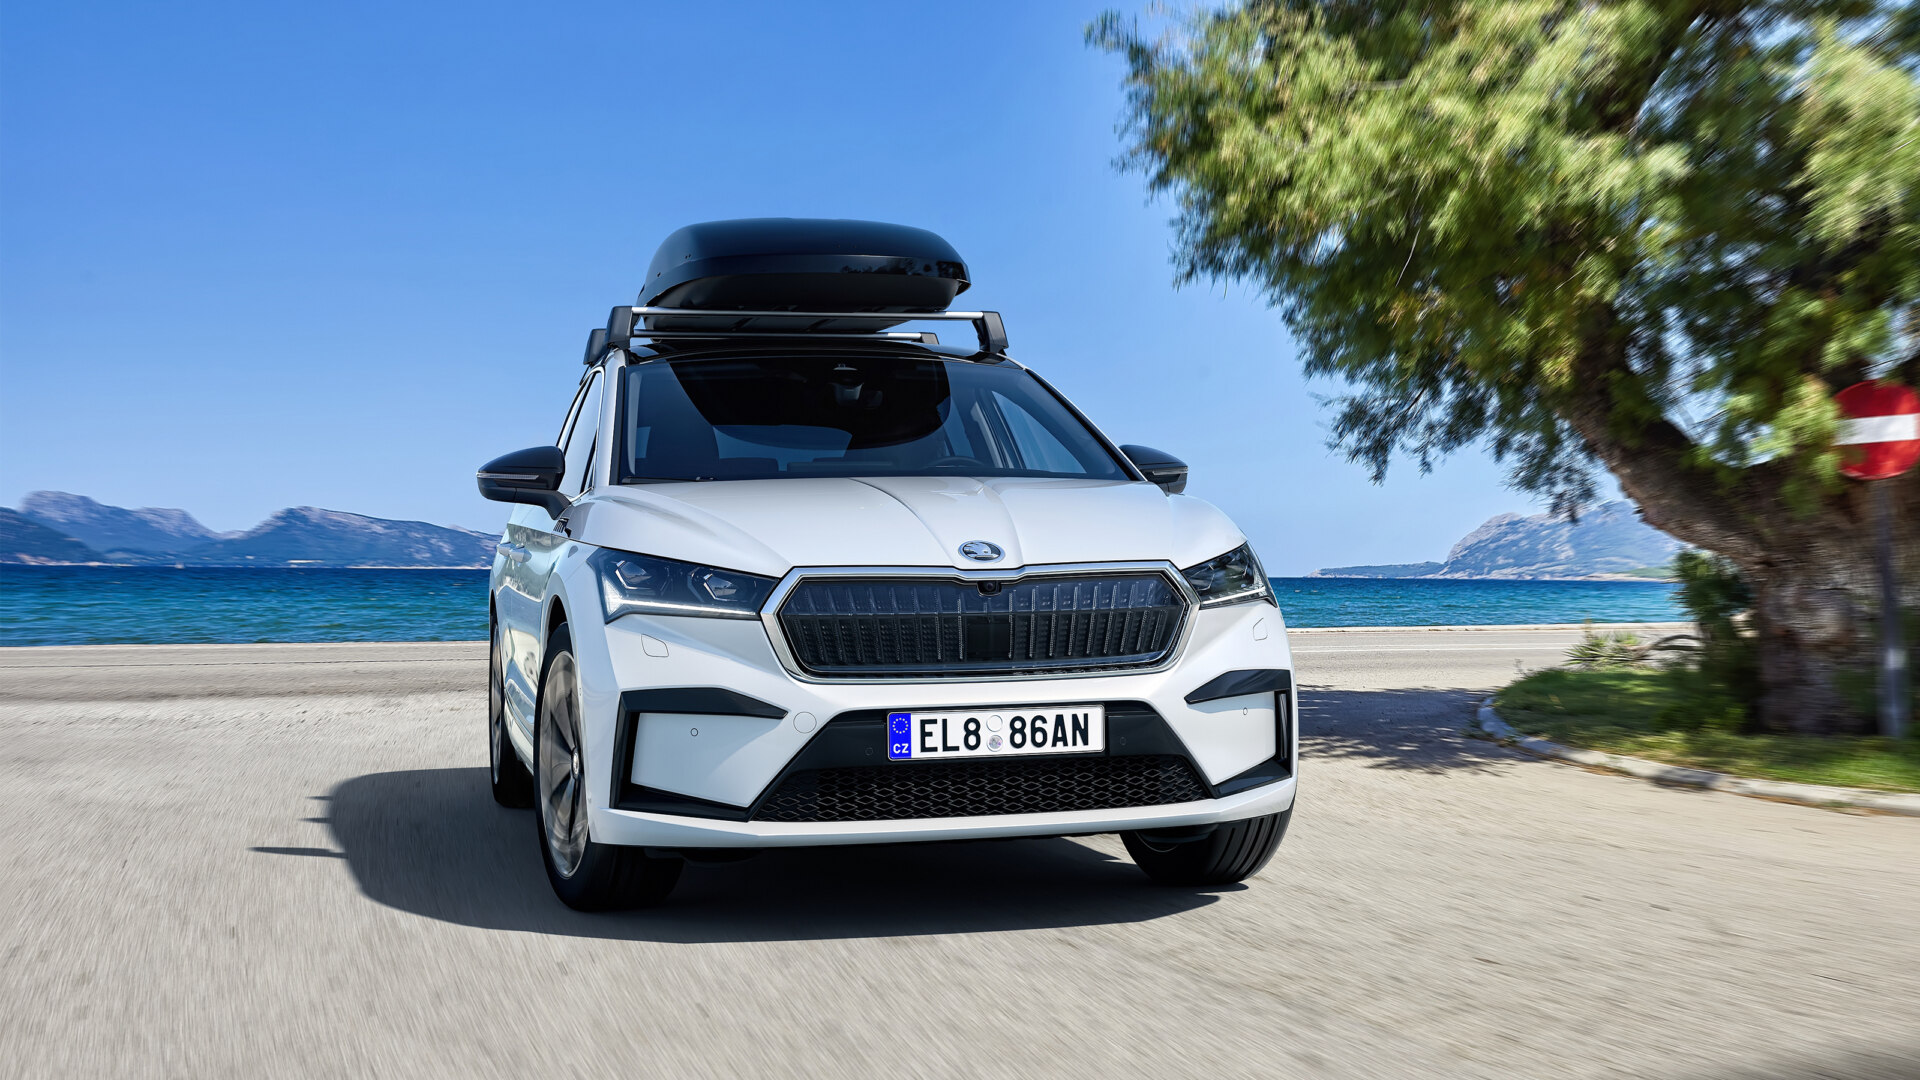 My Enyaq: tips for summer trips (not only) by electric car - Škoda